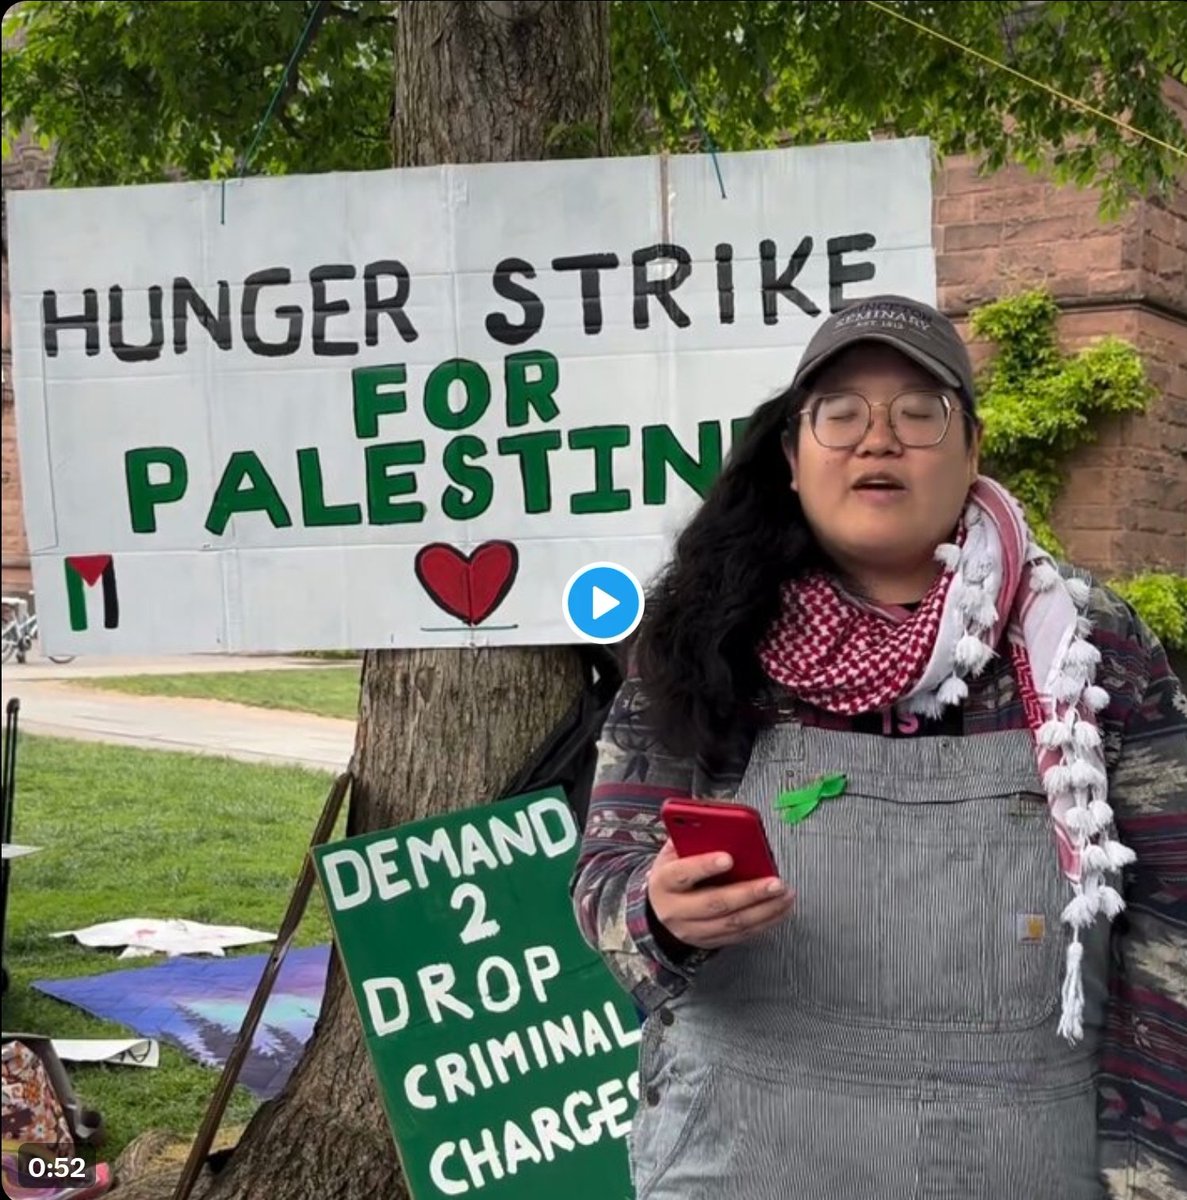 This student is on hunger strike for Palestine. Doctors have given her 18 months to live.